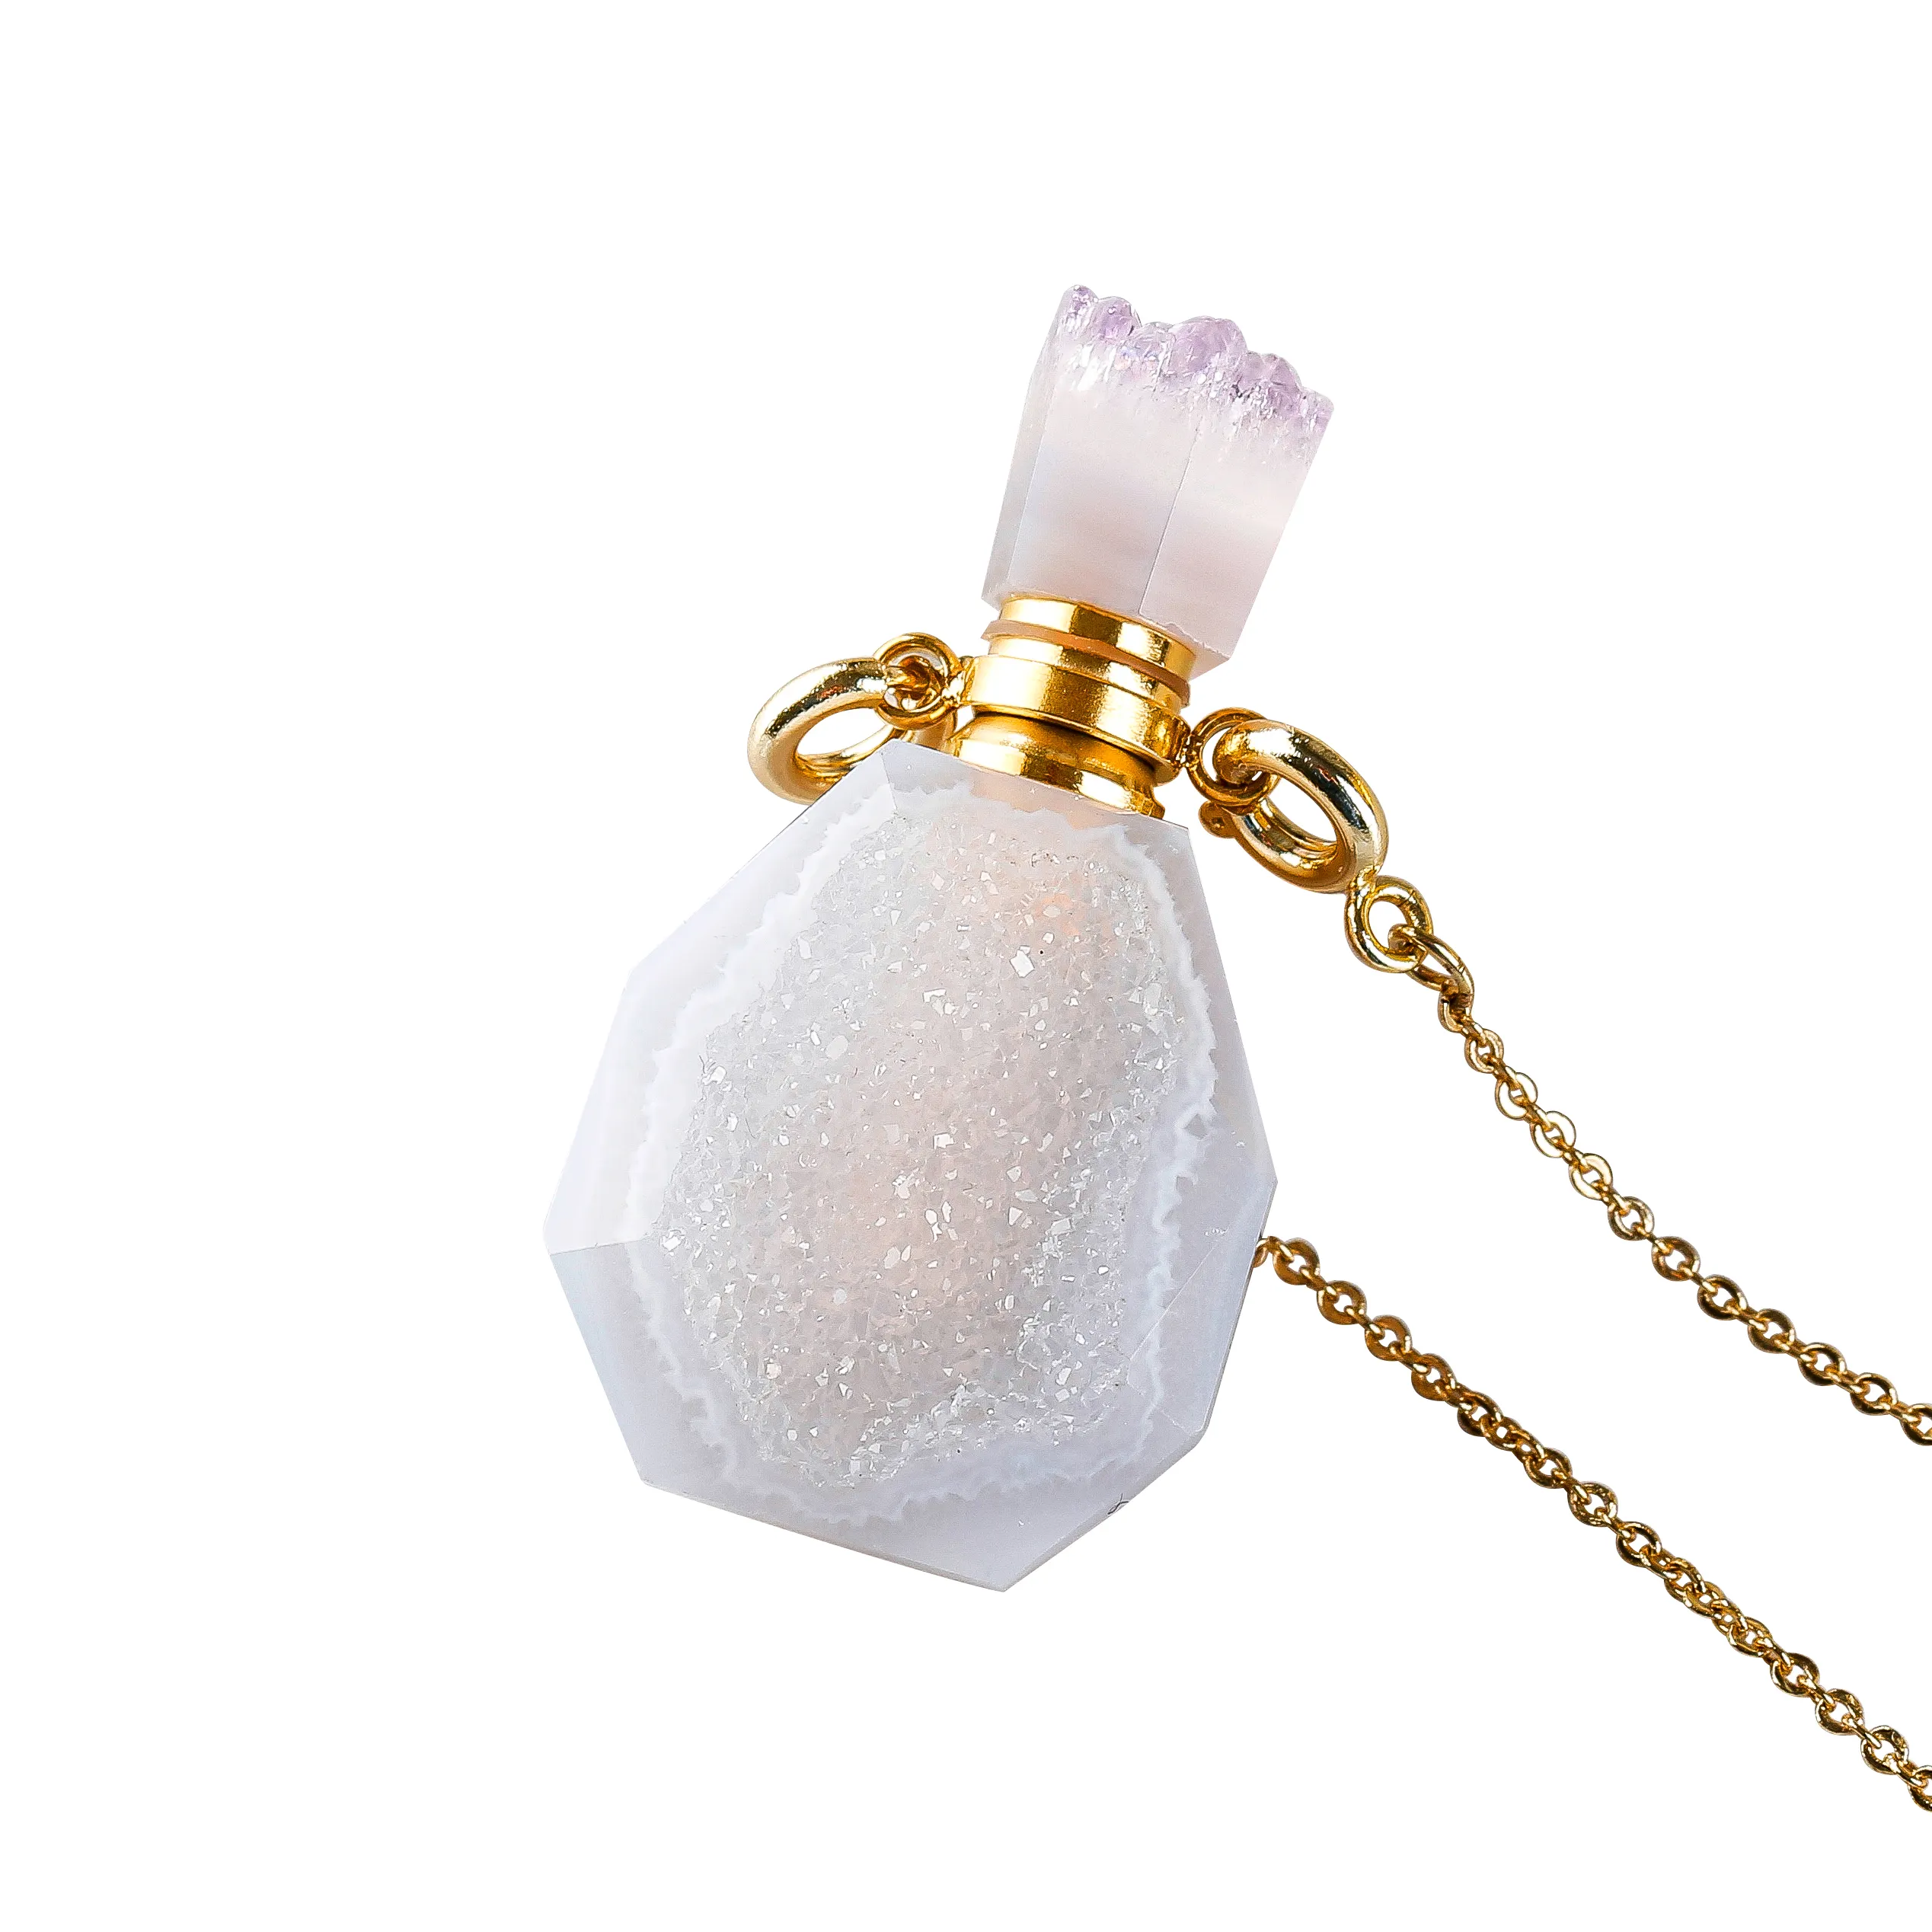 Best Gift Natural Gemstone Crystal Perfume Bottle Necklace For Xmas